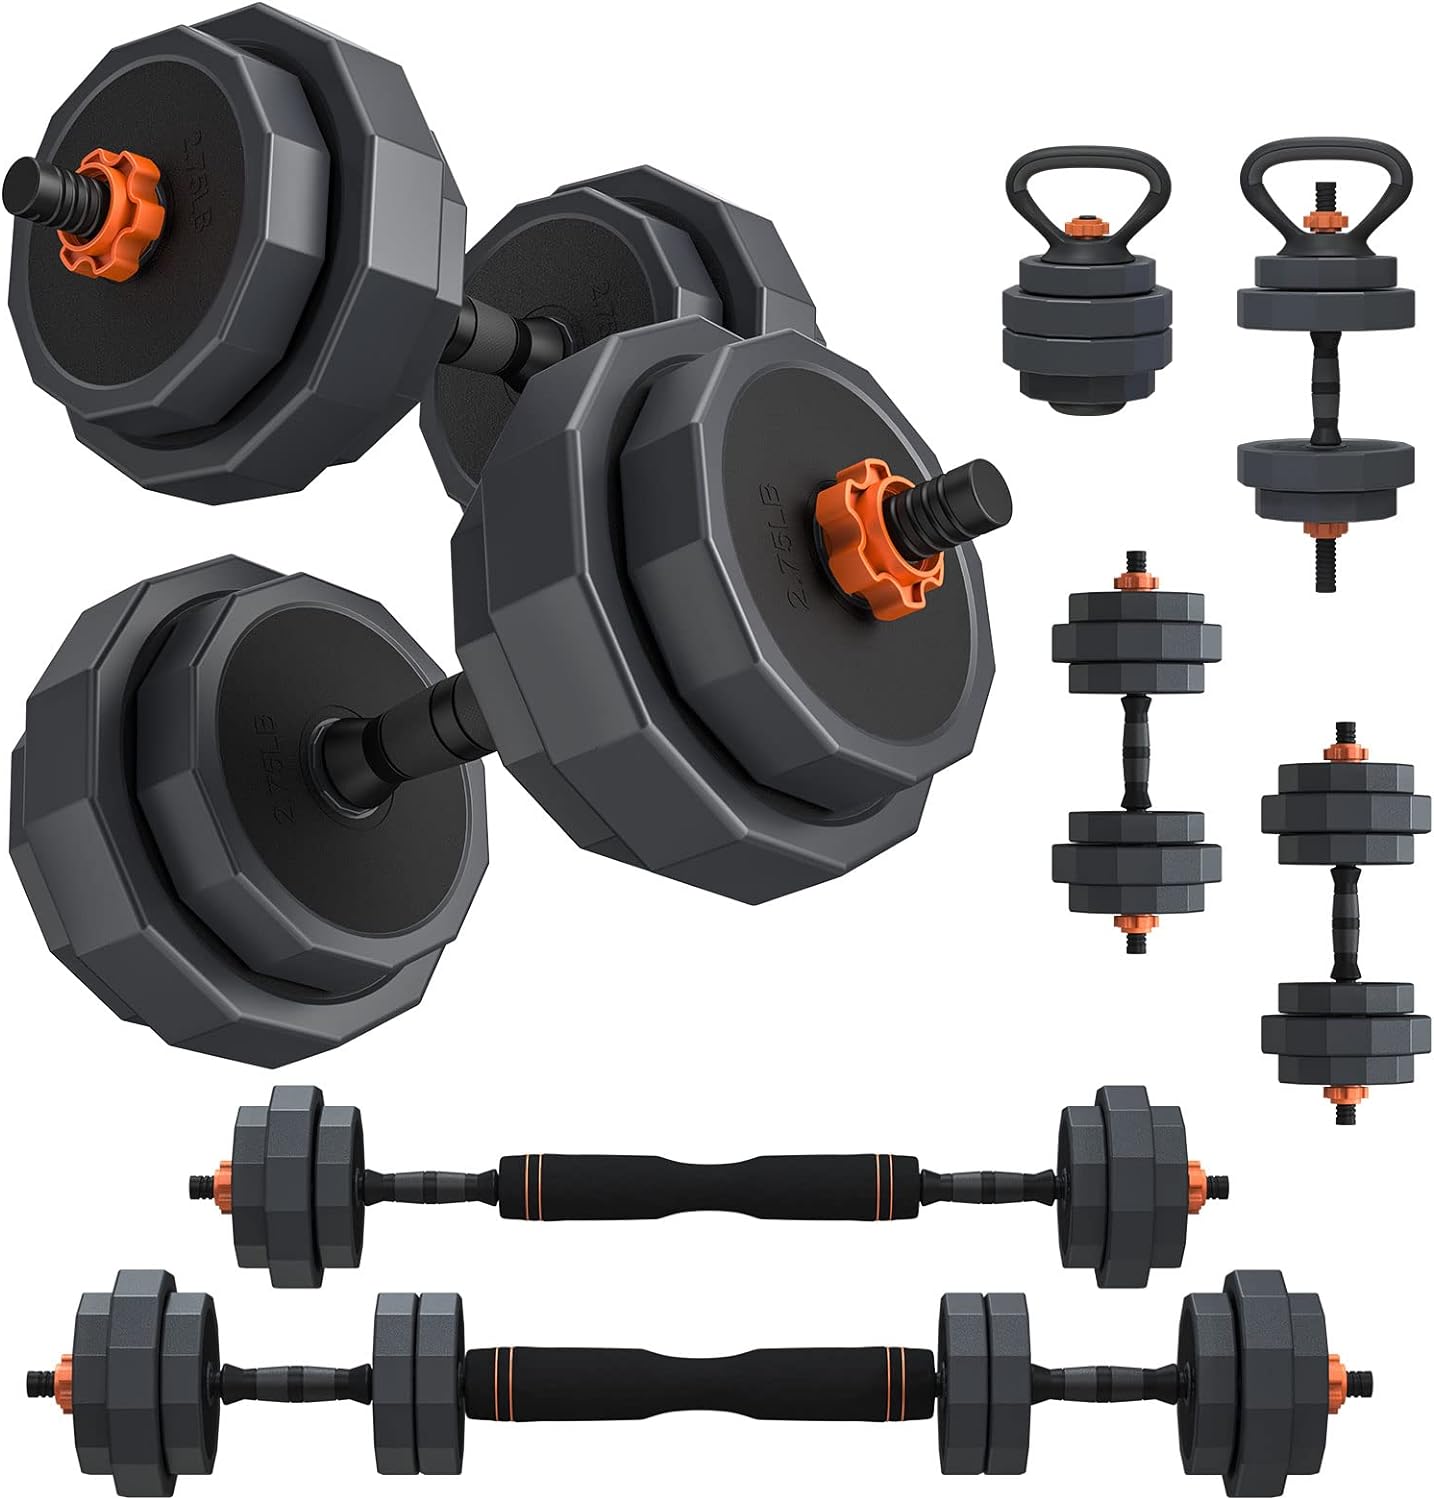 Lusper Adjustable Weights Dumbbells Set, 44LB/55LB/66LB Free Weights, 3 in 1 Mutiweight Dumbbell/Barbell/Kettlebell with Connector, Versatile Weight Set for Home Gym